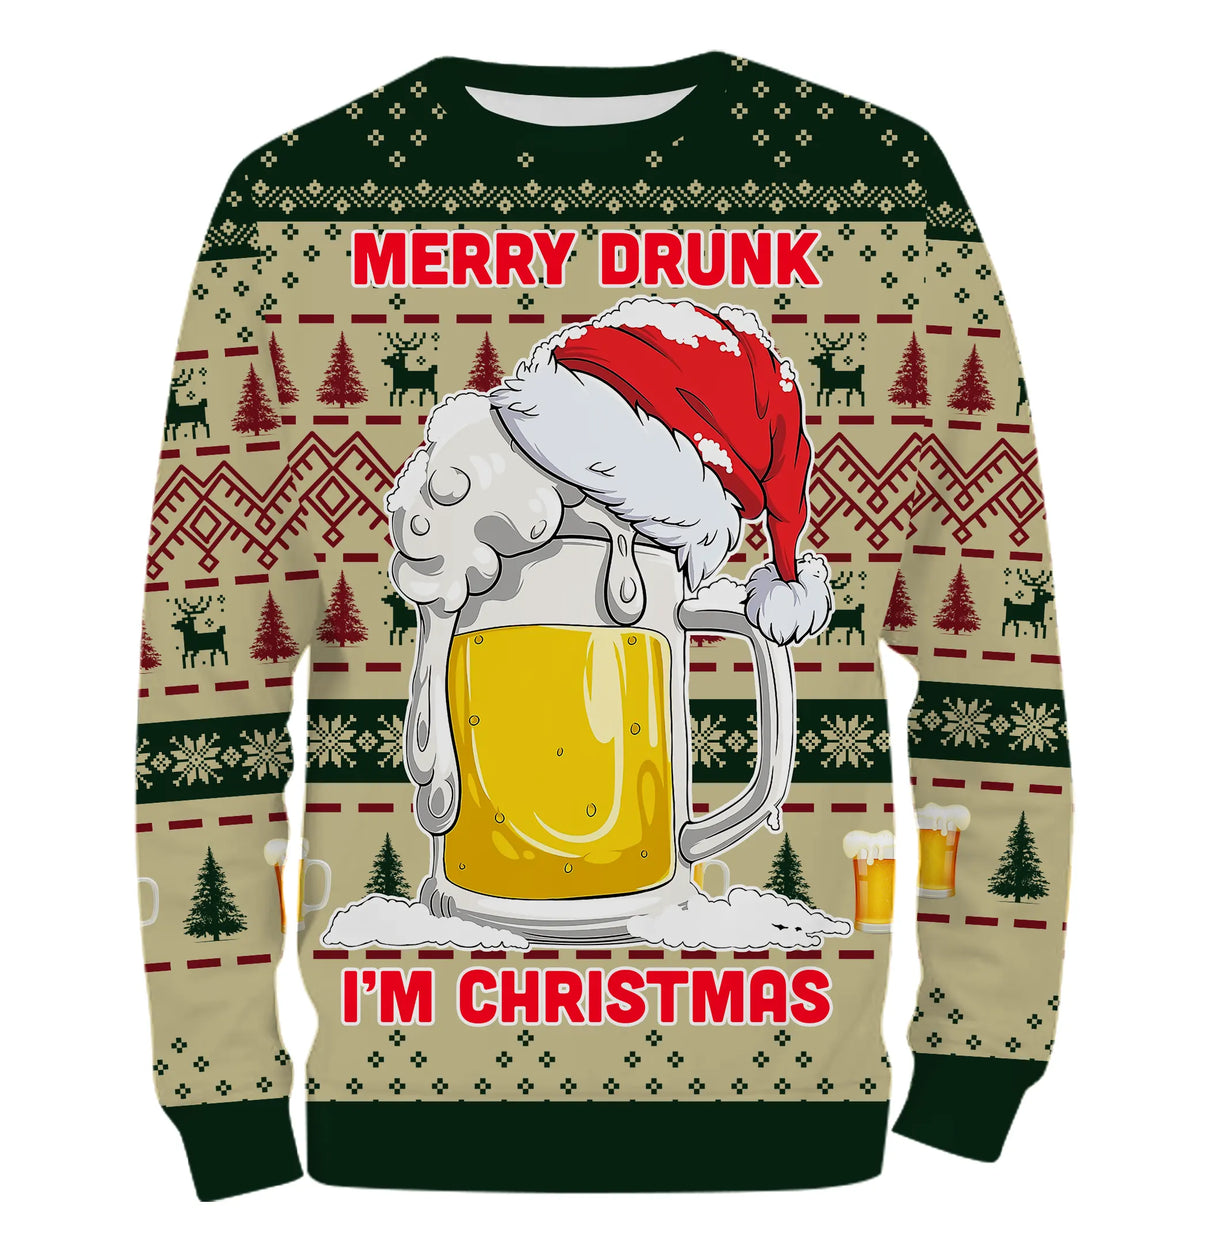 Christmas Sweater, Beer, Merry Drunk, Family Christmas Gift - CT07112238